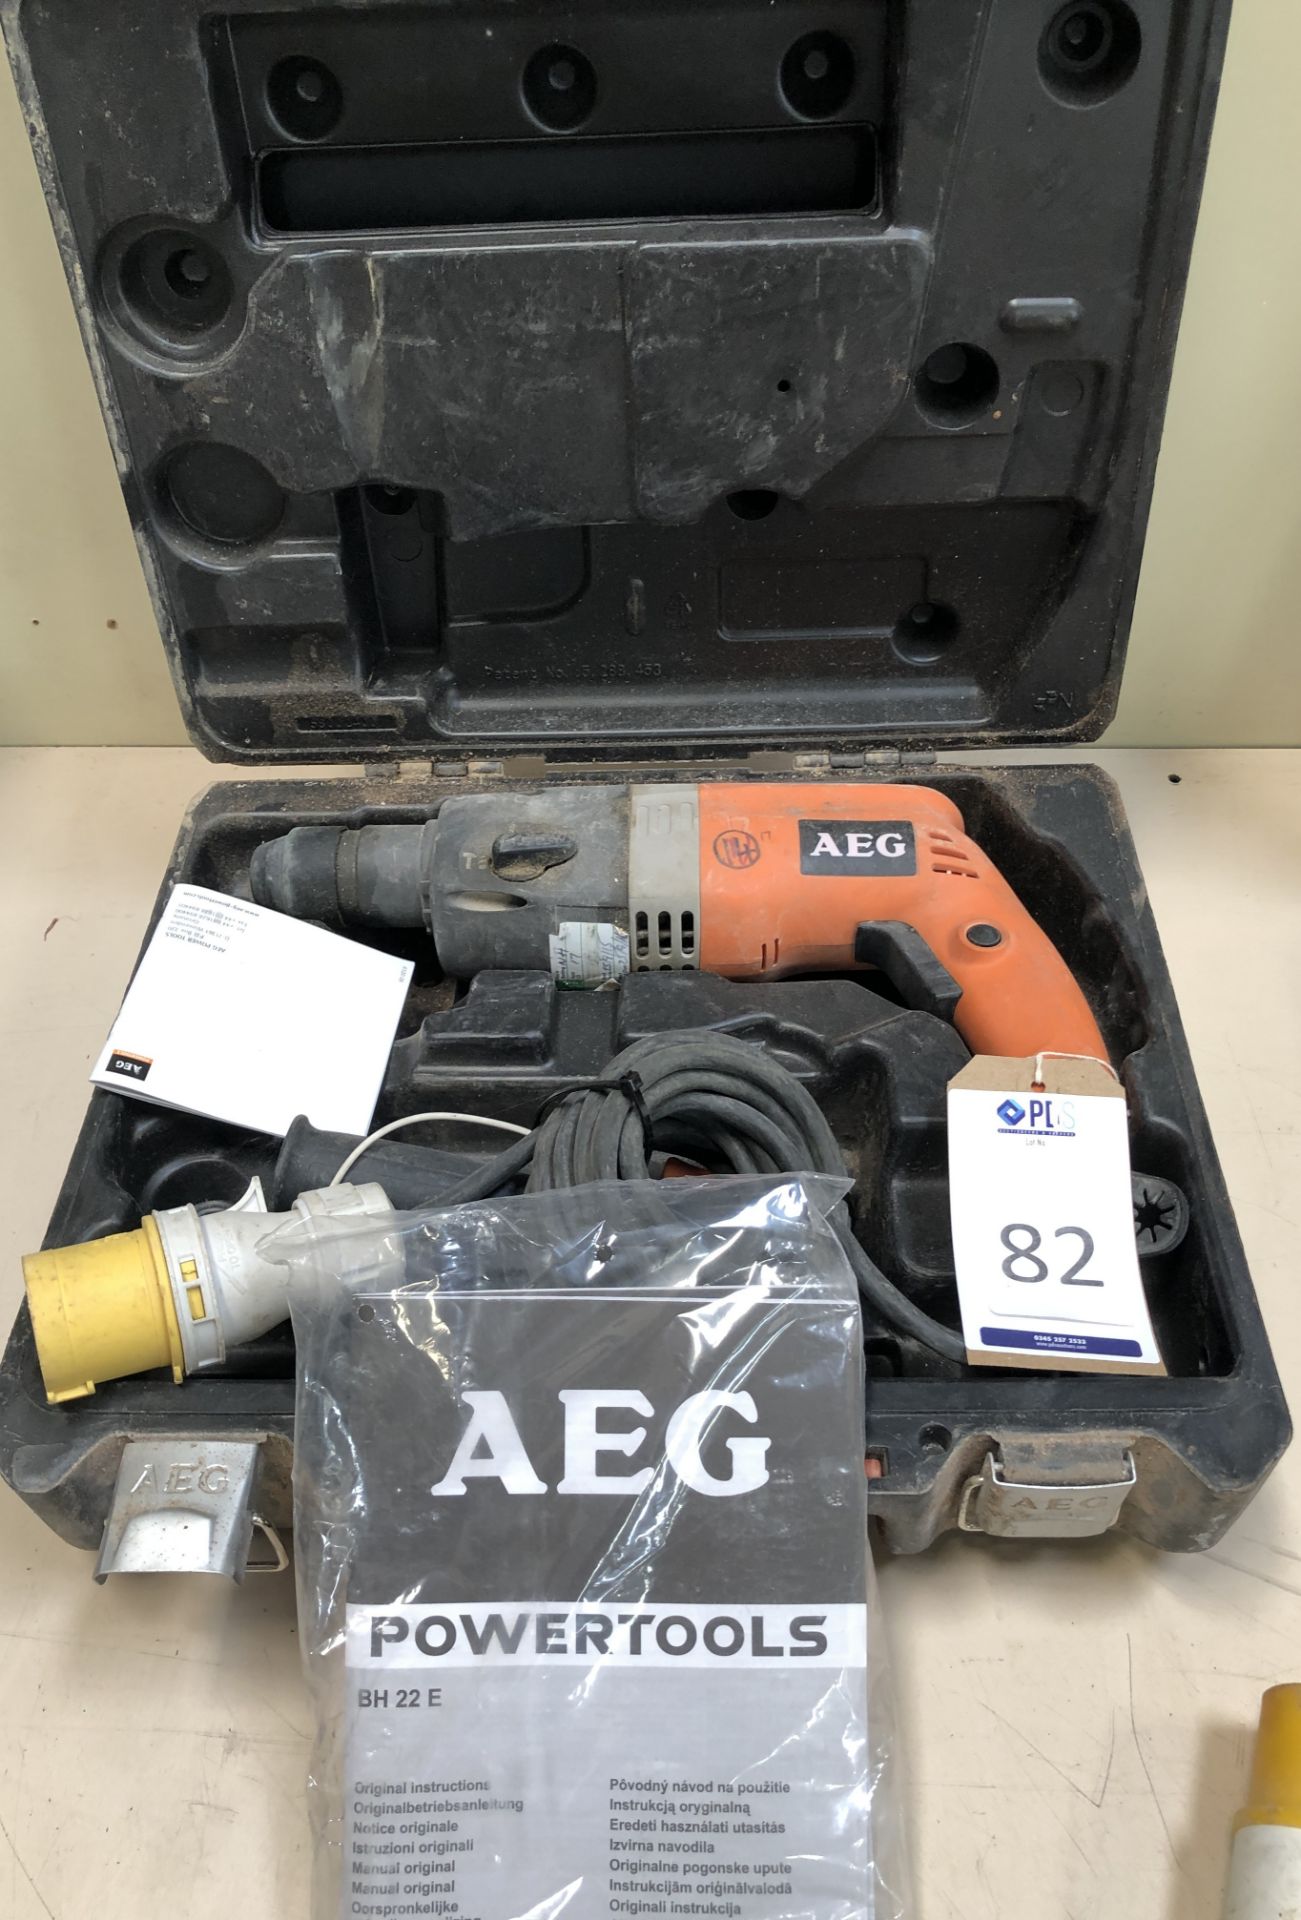 AEG BH 22 E Hammer Drill, 110v (Location: Brentwood. Please Refer to General Notes)